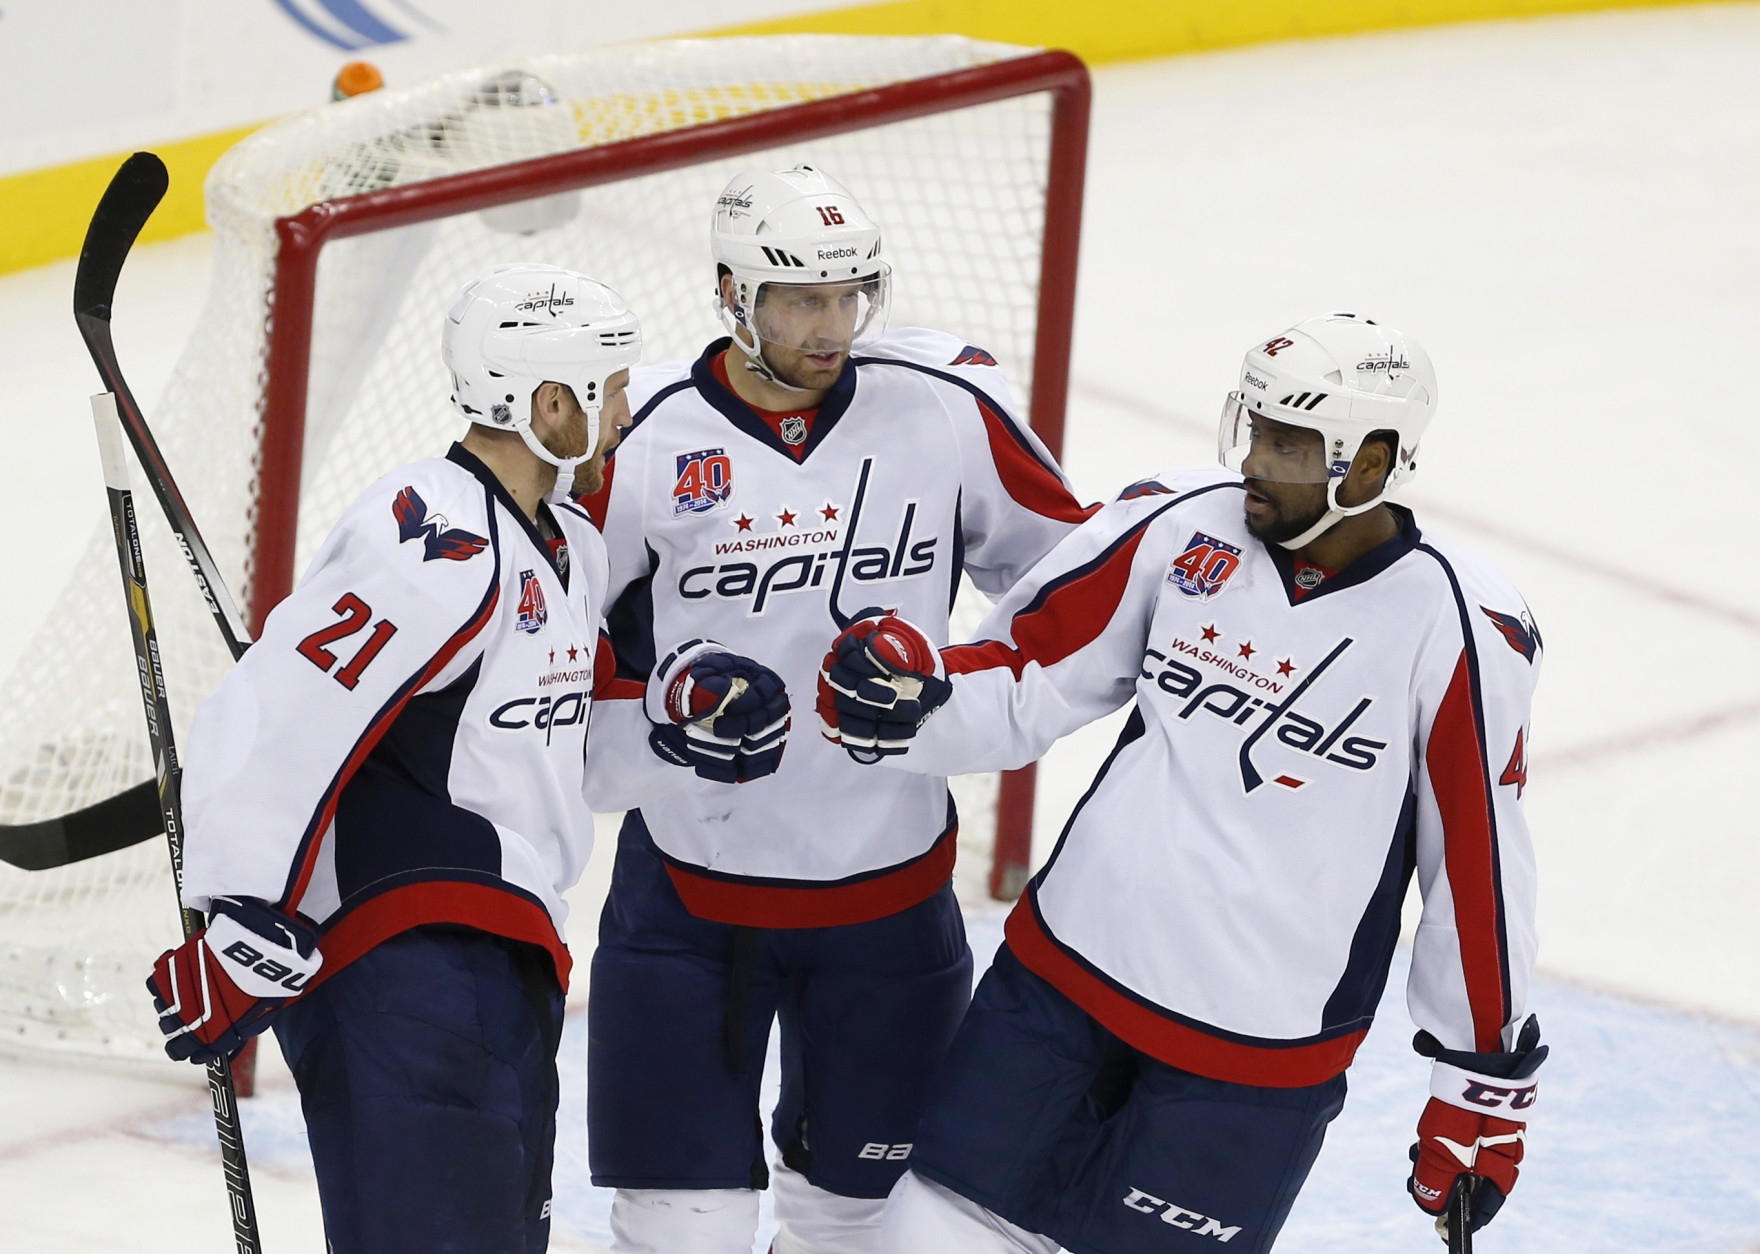 From left to right, former Washington Capitals' Brooks Laich, Eric Fehr and Joel Ward celebrate Laich's open-net goal against the New Jersey Devils during the third period of an NHL hockey game, Saturday, Dec. 6, 2014, in Newark, N.J. The Capitals won 4-1. (AP Photo/Julio Cortez)